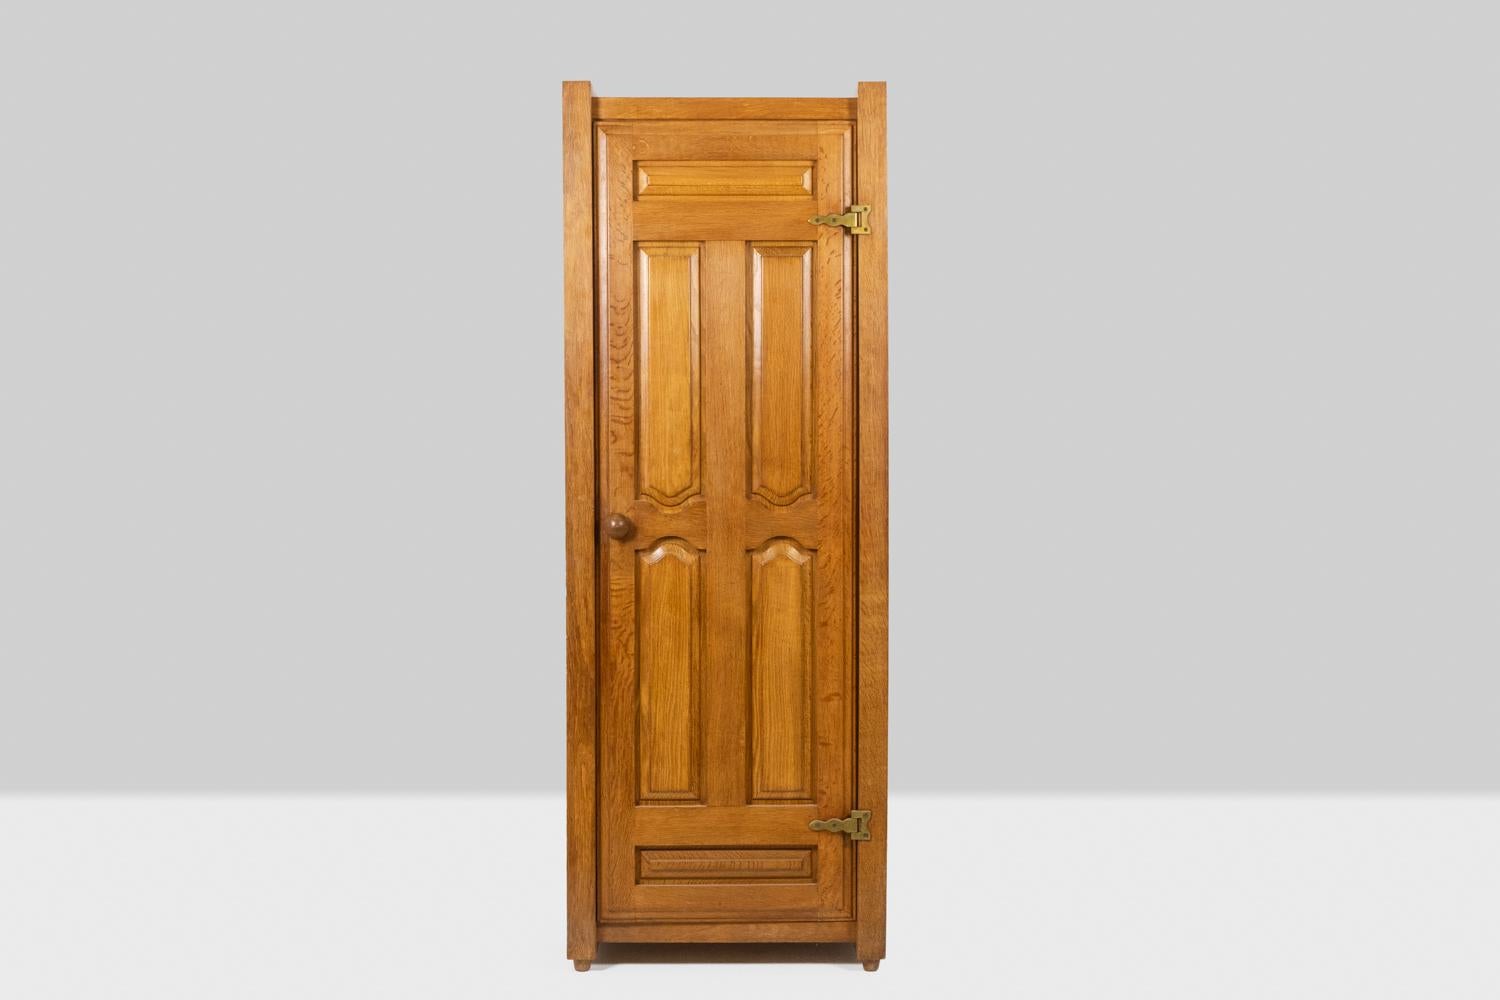 Guillerme and Chambron, by.

Wardrobe in blond solid oak, rectangular in shape, opening with a door. Matt golden brass hinges.

French work realized in the 1970s.
